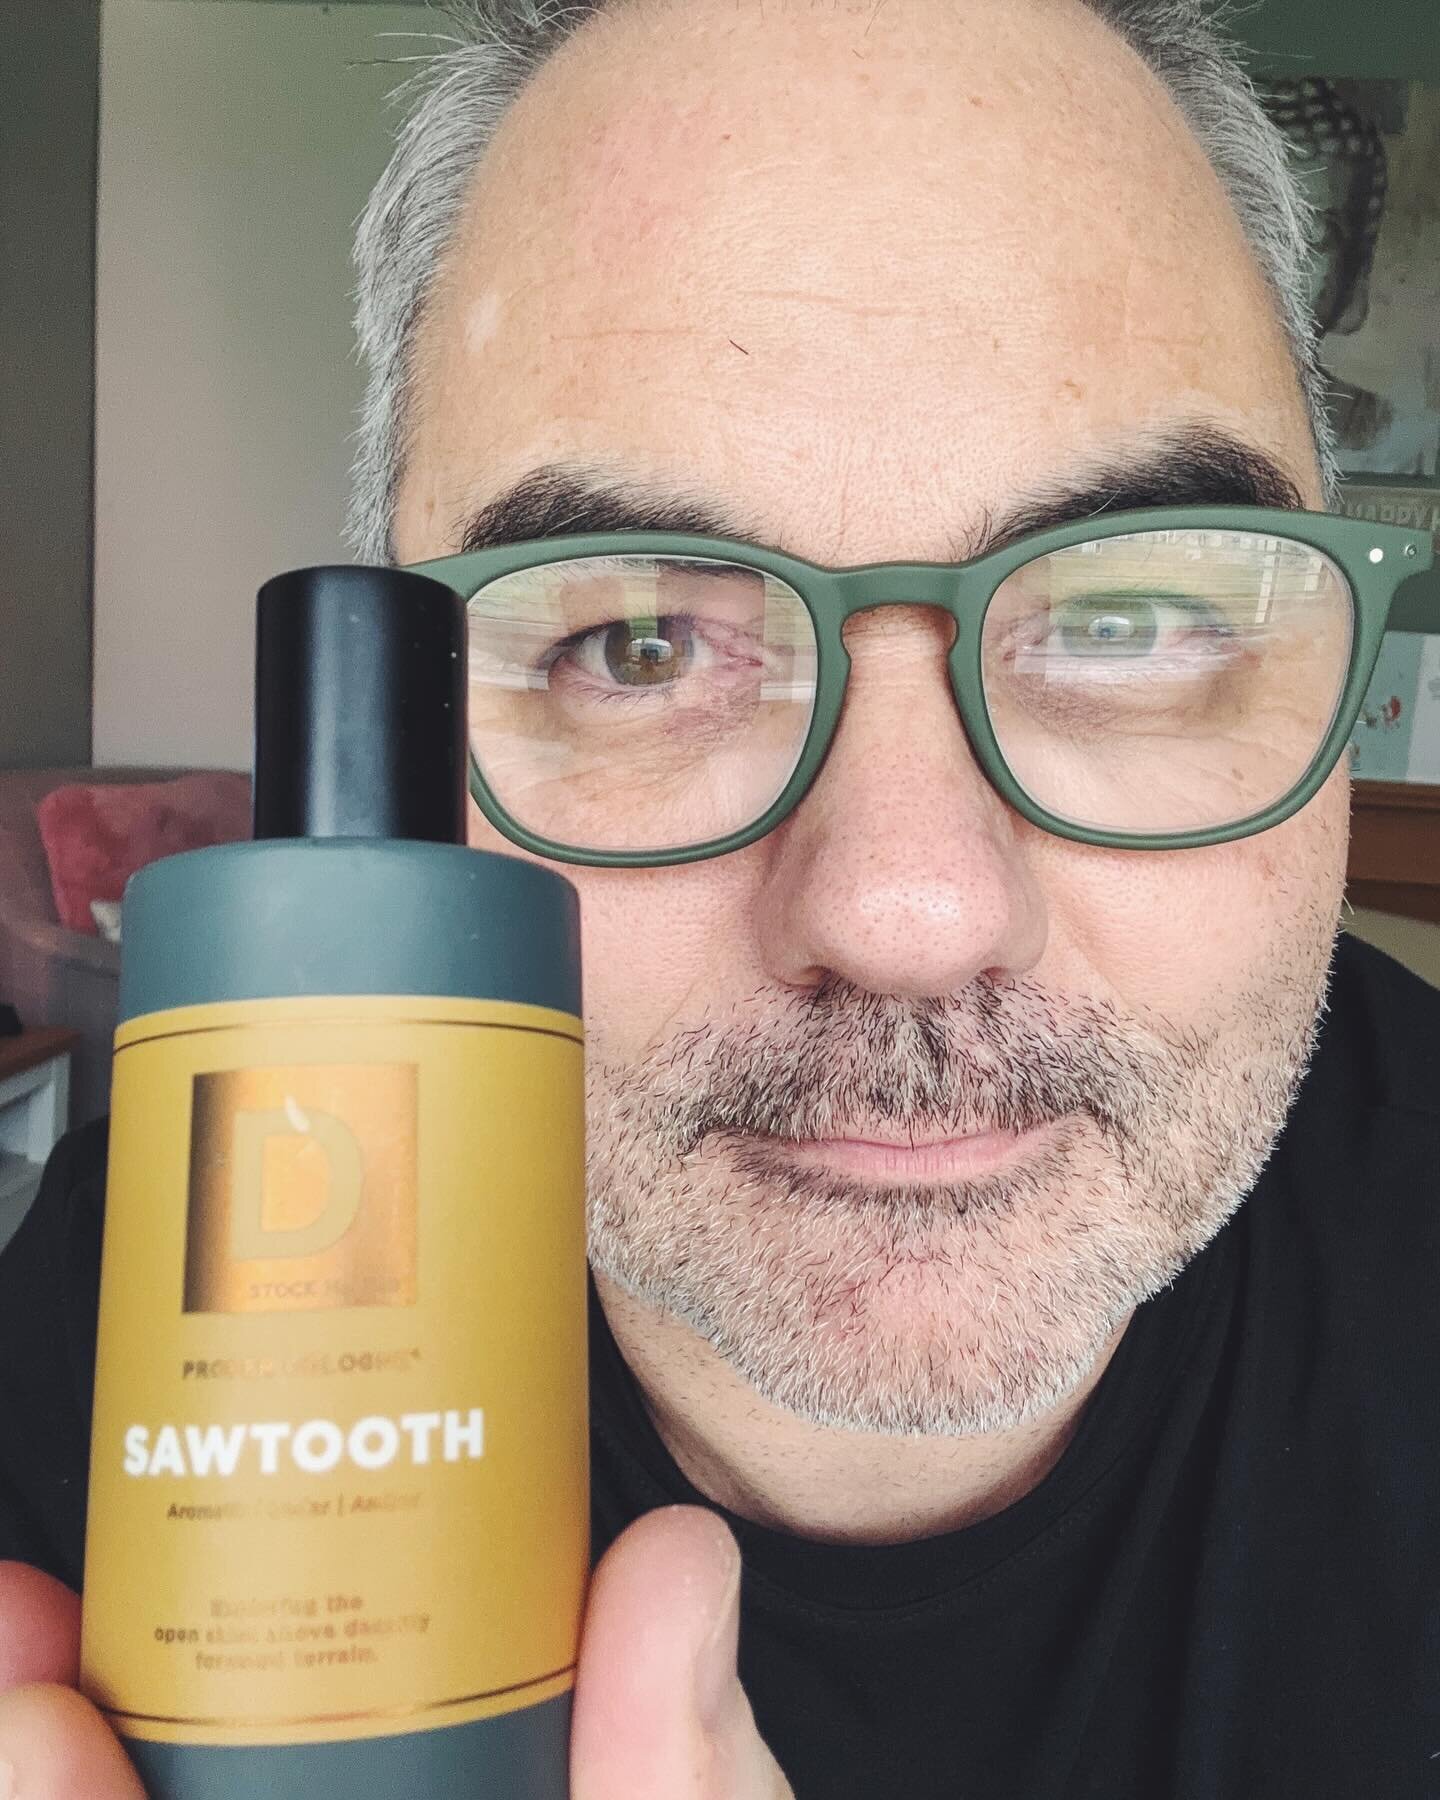 Check my new review: @dukecannon #sawtoothcologne 
This is a $25 fragrance that smells so good!
Read my full and honest review (link in profile).
#dukecannon #dukecannon #fragrancelover #fragranceformen